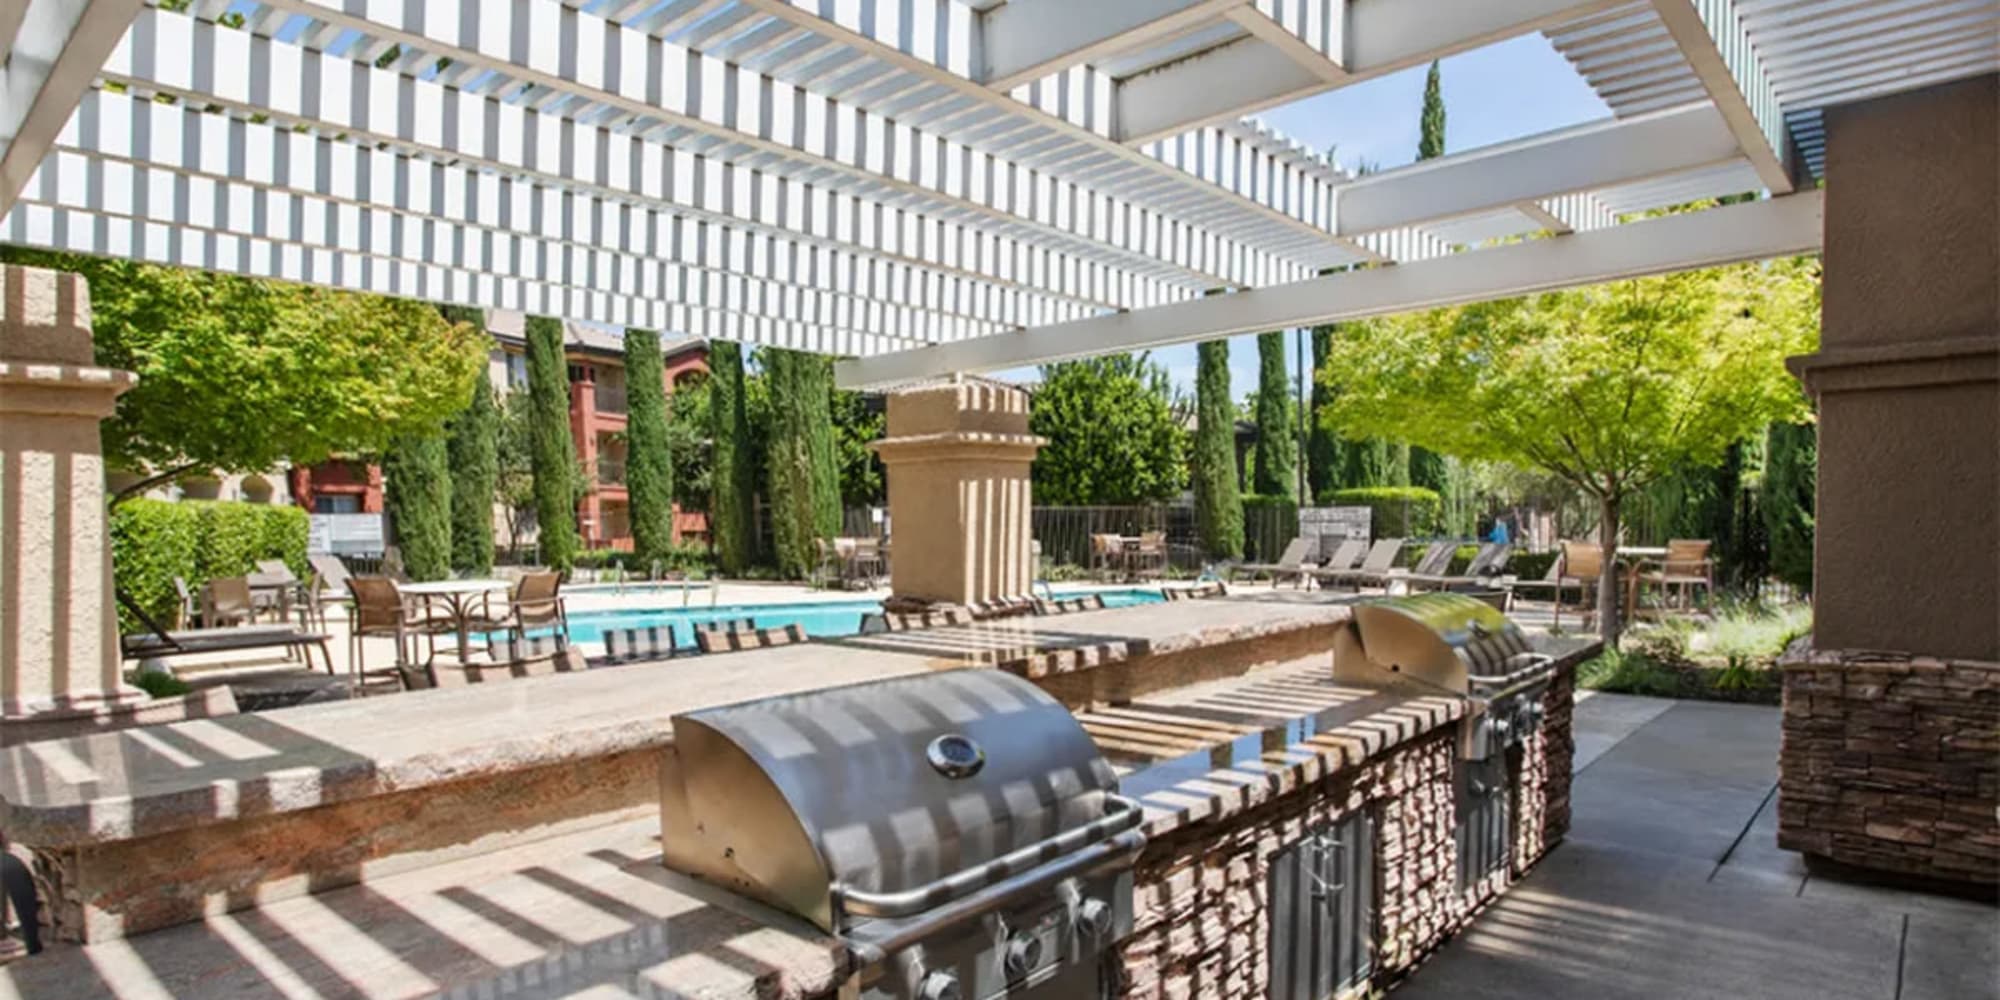 Gas grill and outdoor kitchen under a pergola in the courtyard at Villagio Luxury Apartments in Sacramento, California